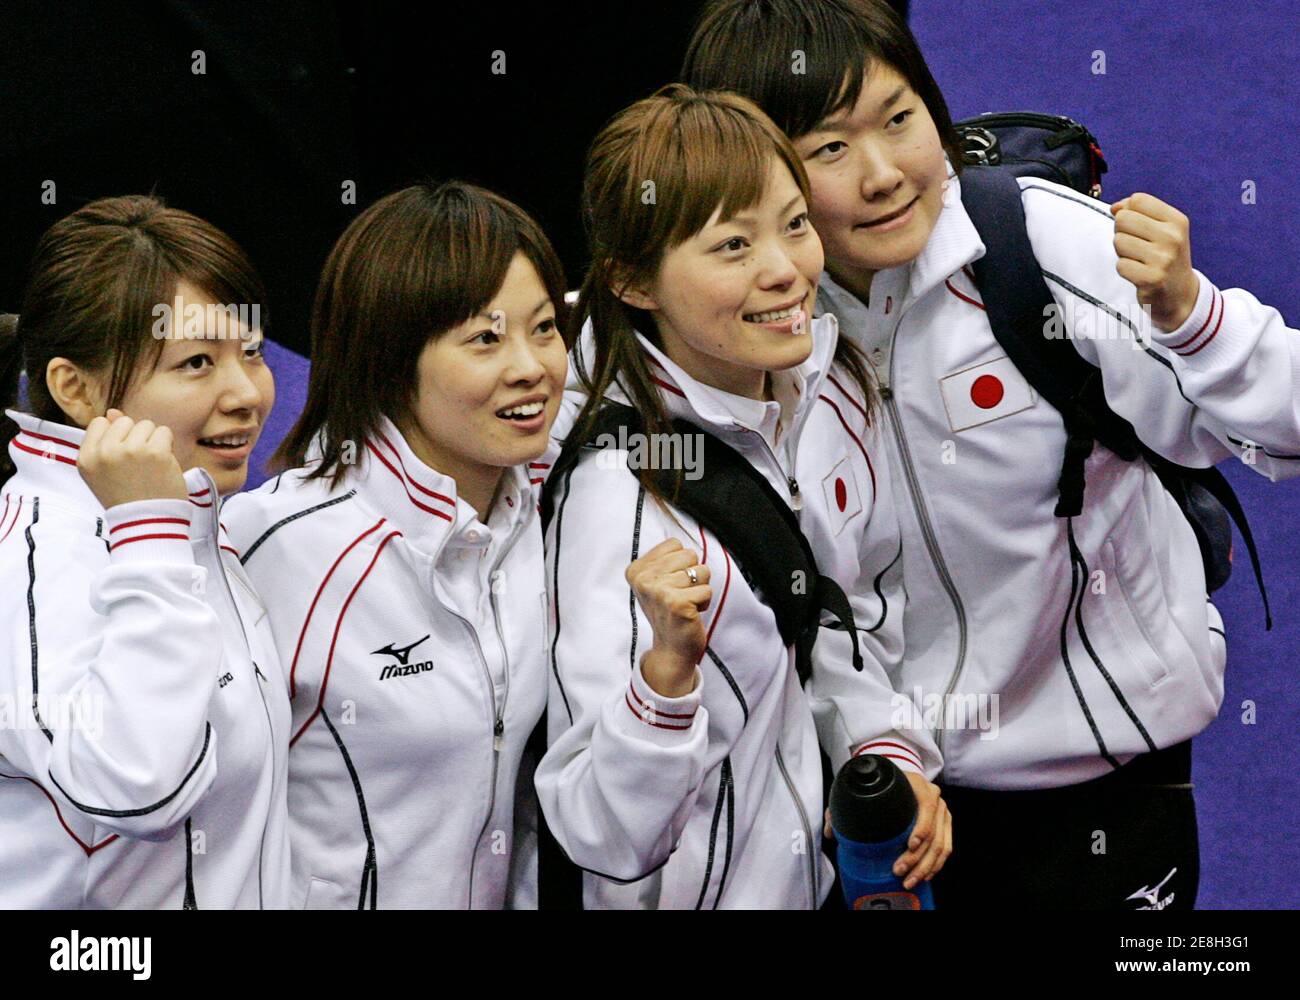 Japan's women's curling team (L-R) Mari Motohashi, second, Yumie Hayashi, third, Ayumi Onocdera, Skip and lead Moe Meguropose pose after defeating Italy during the Torino 2006 Winter Olympic Games in Pinerolo, Italy February 20, 2006. Japan won the match 6-4. REUTERS/Andy Clark Stock Photo